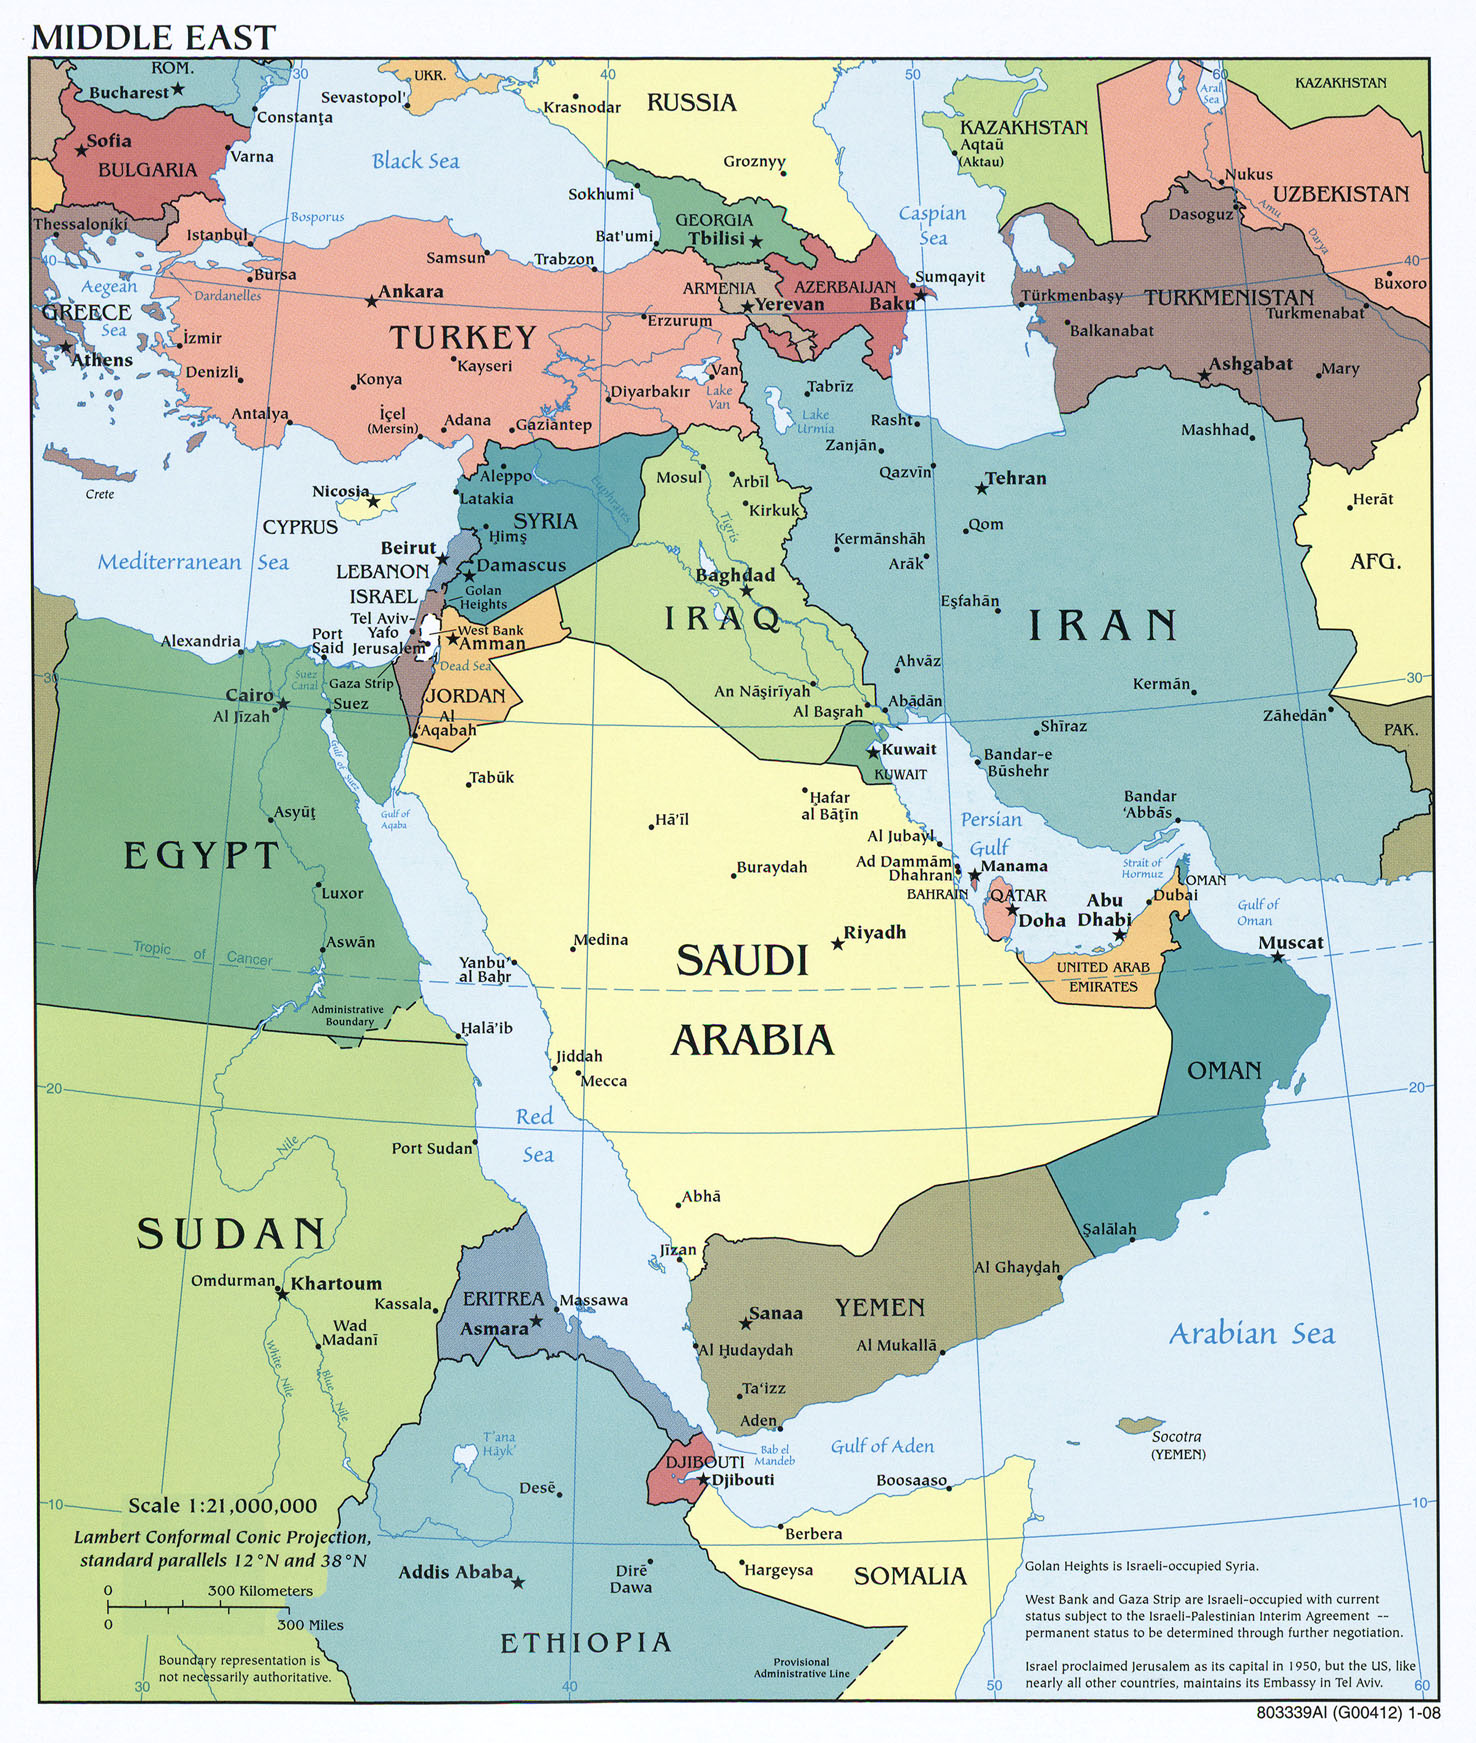 Middle East Political Map 2008 - Full size